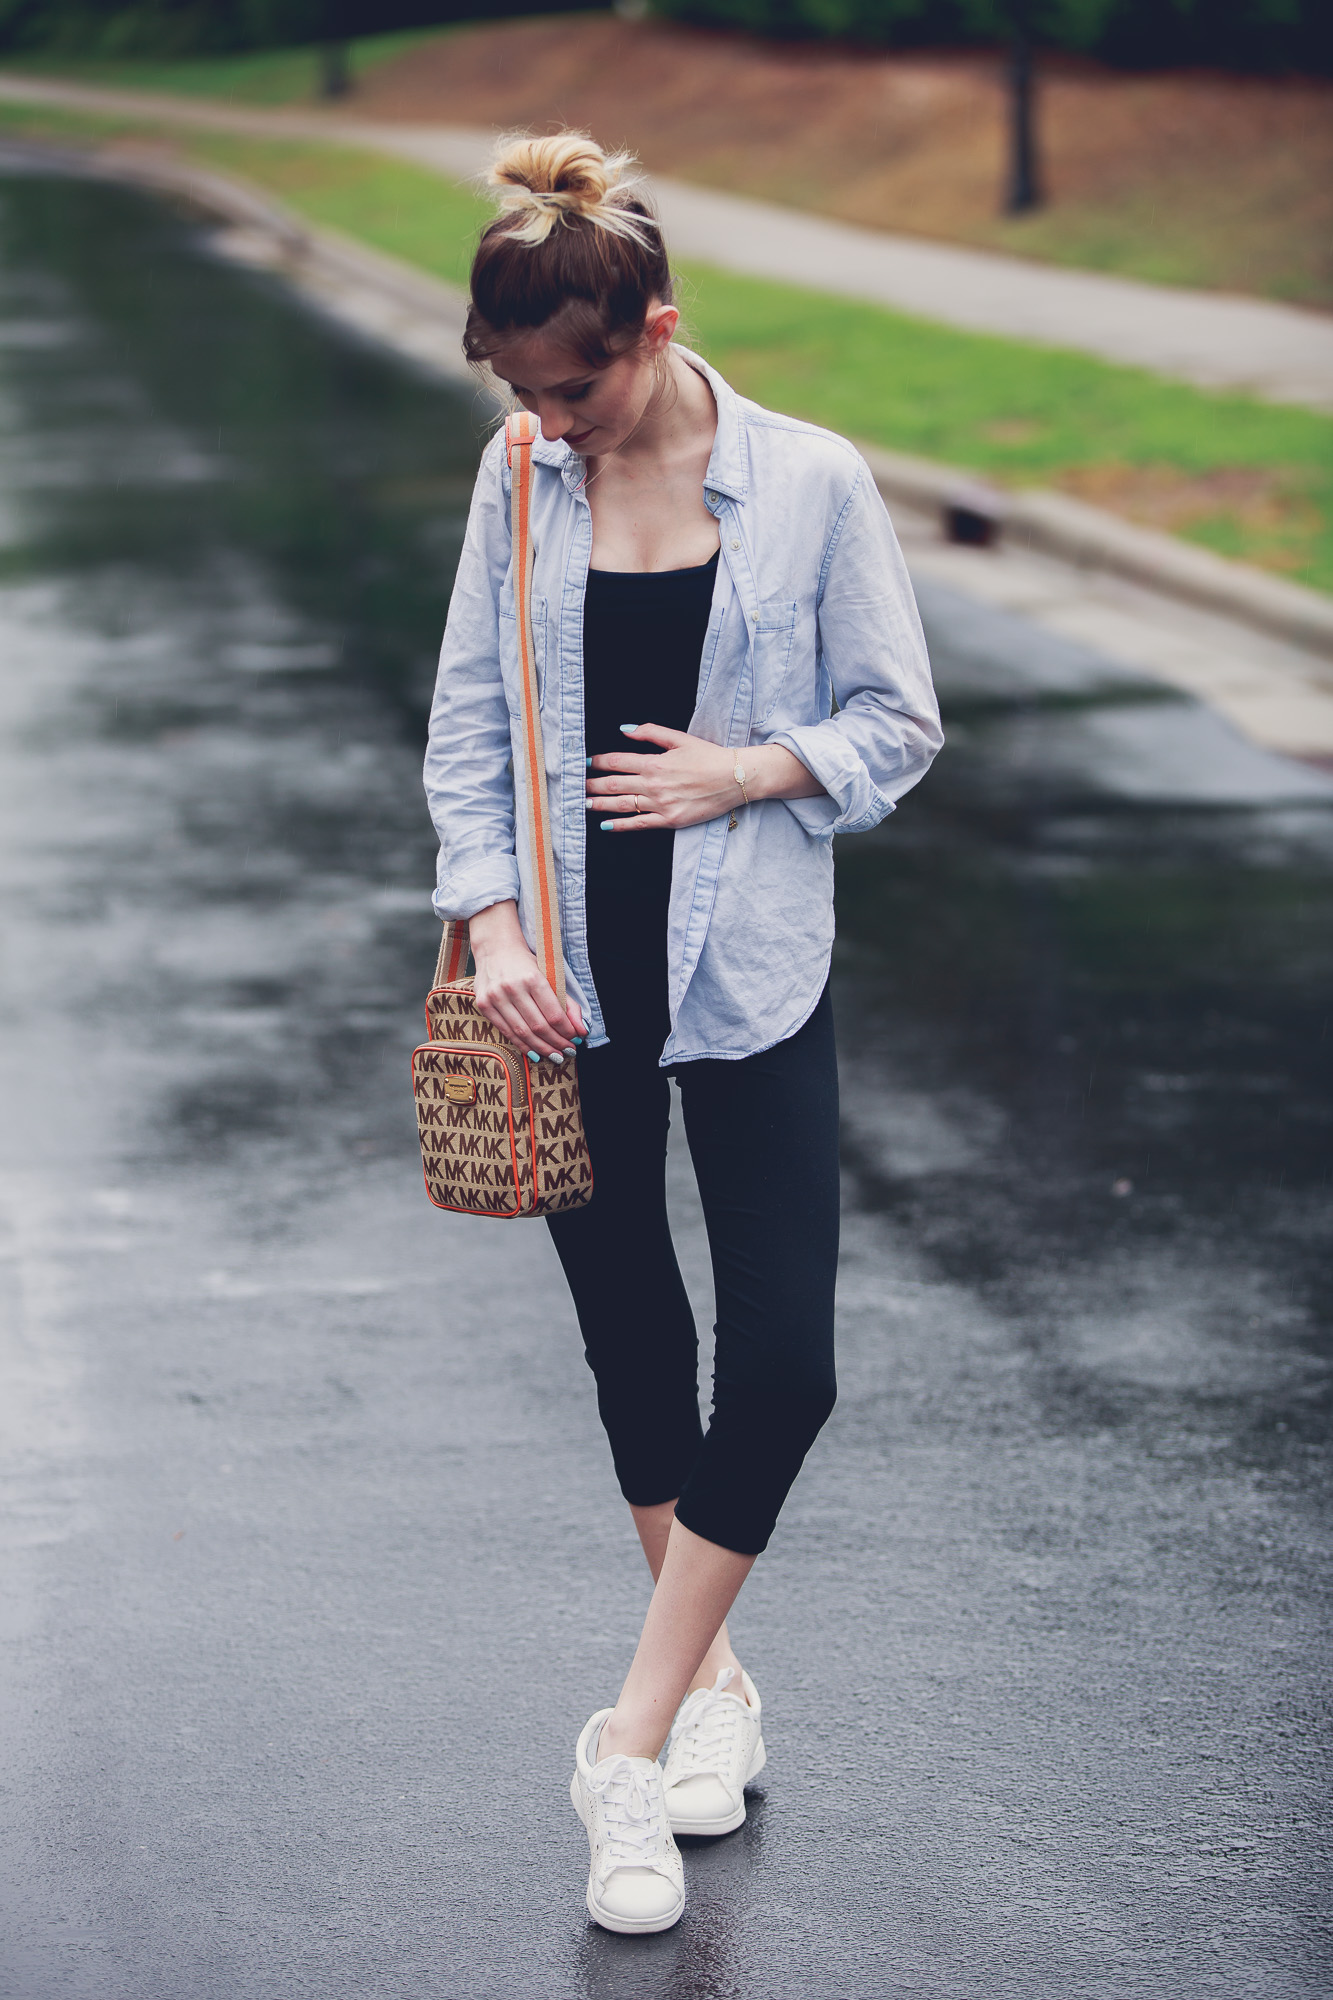 Fashion and lifestyle blogger Jessica Linn from Linn Style wearing a casual outfit: Target maternity leggings, an aeropostale tank top, and chambray button up, Target tennis shoes, Charming Charlie's earrings, and a Michael Kors purse in Cary North Carolina